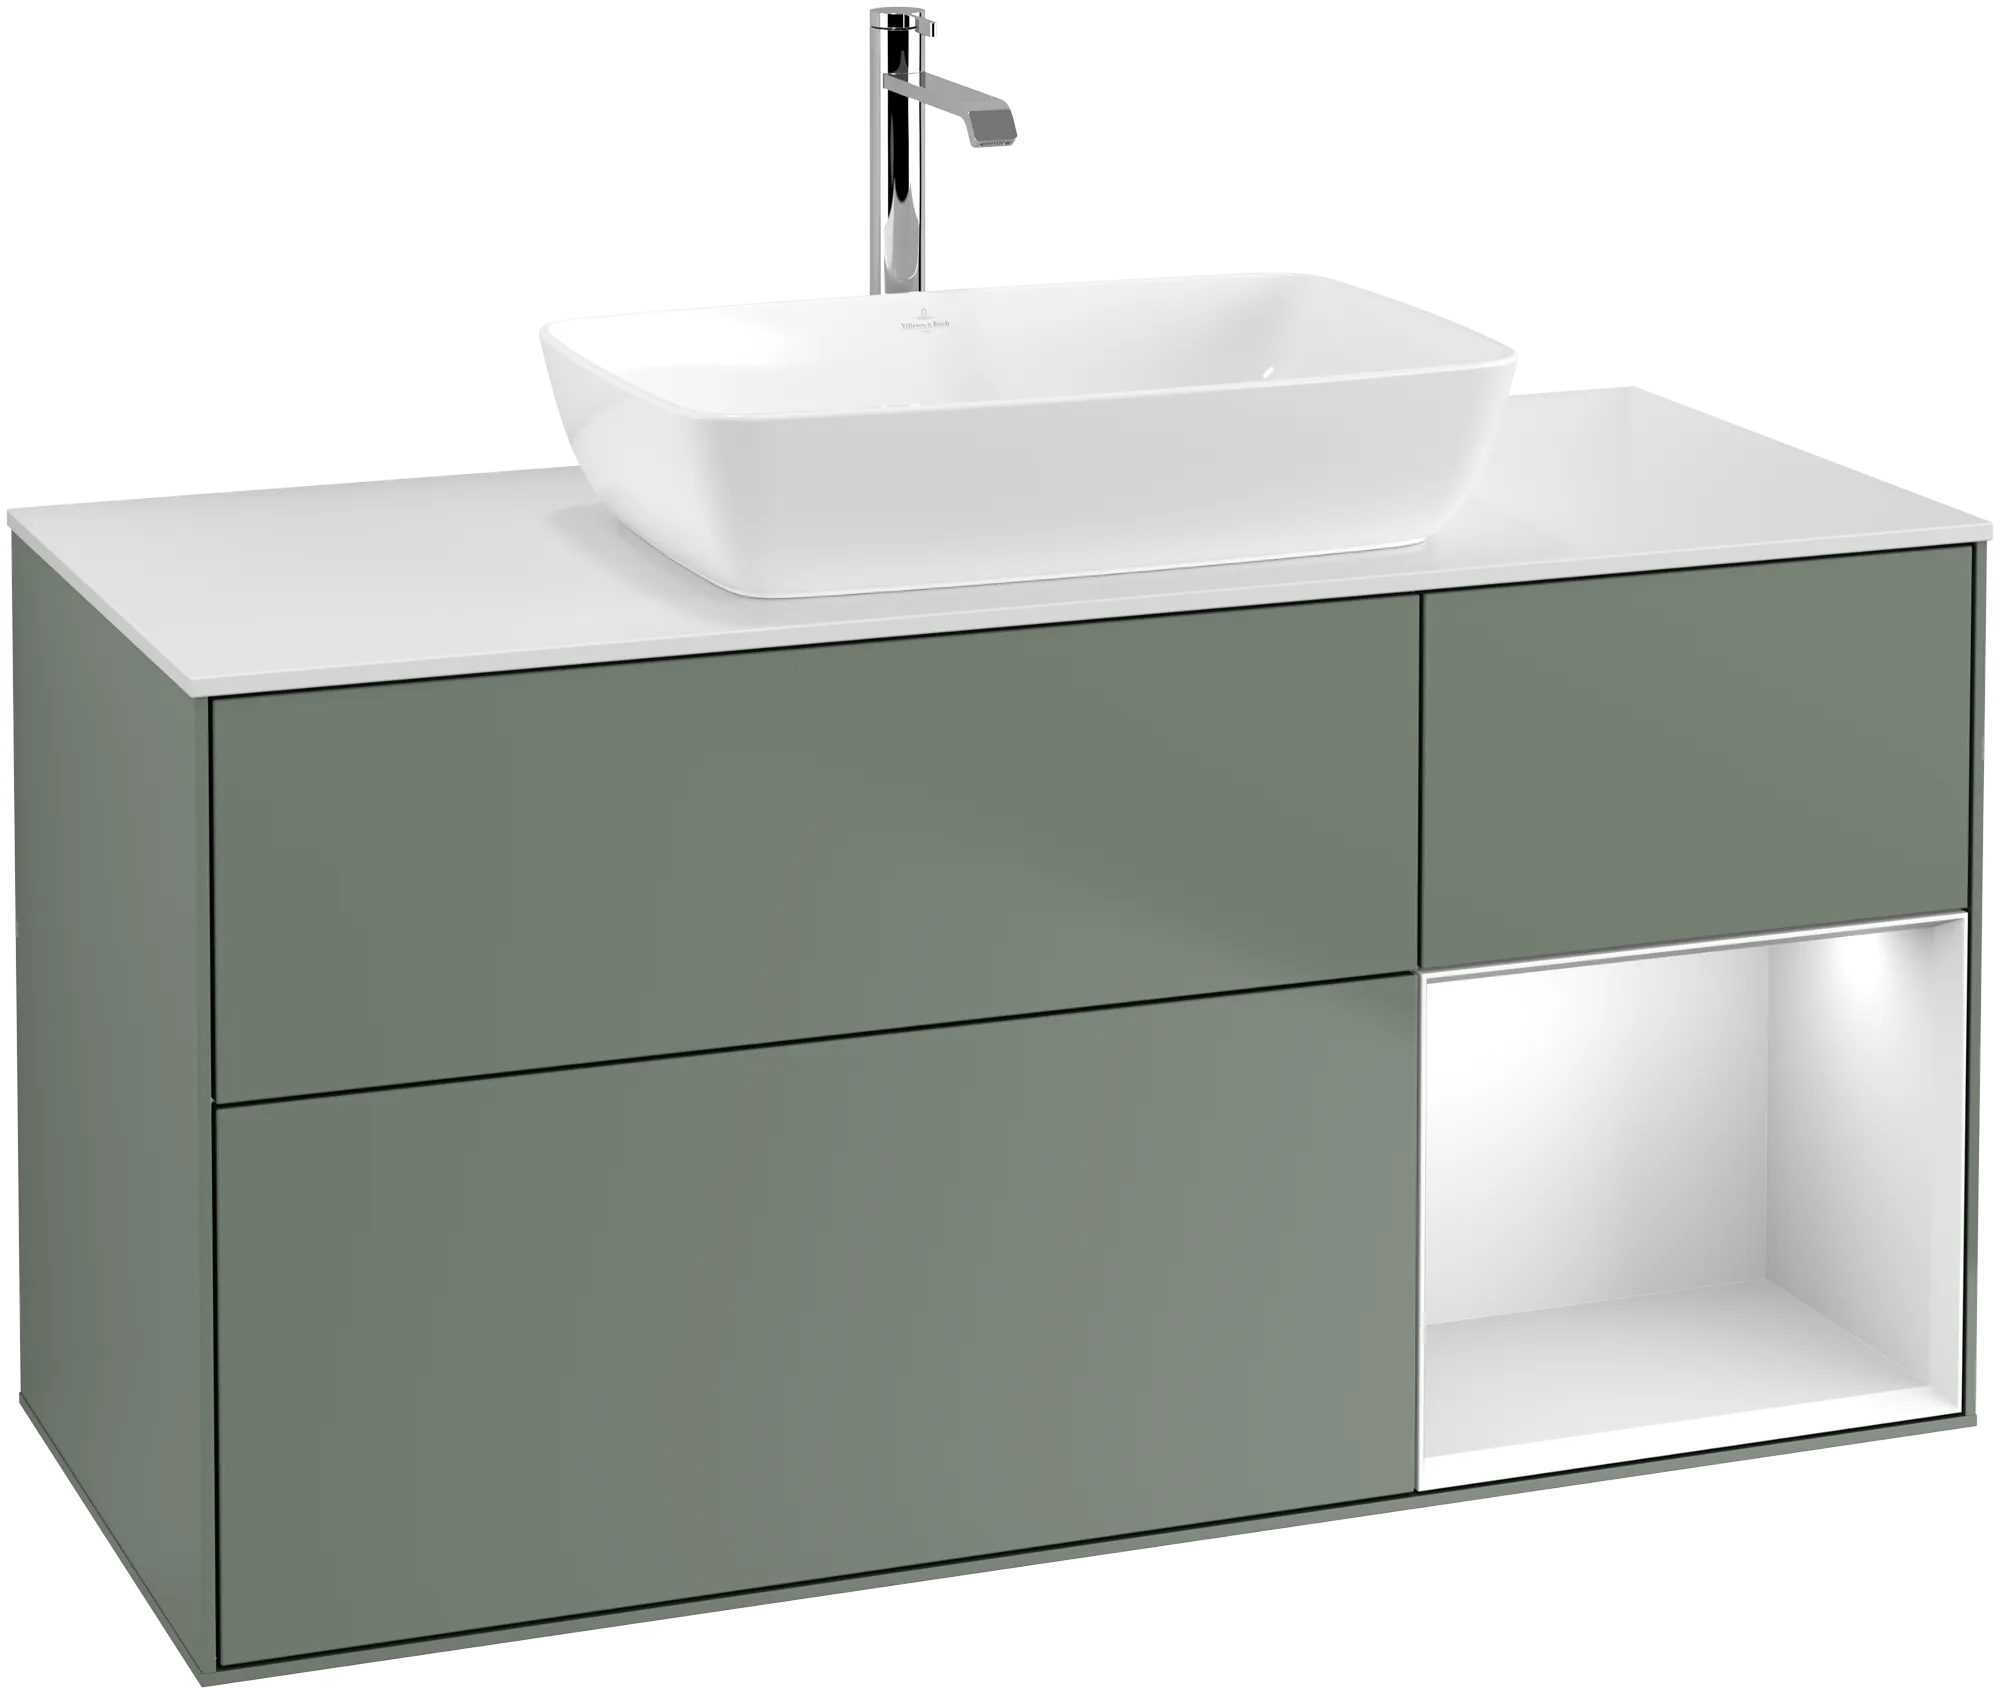 Obrázek VILLEROY BOCH Finion Vanity unit, with lighting, 3 pull-out compartments, 1200 x 603 x 501 mm, Olive Matt Lacquer / White Matt Lacquer / Glass White Matt #G831MTGM